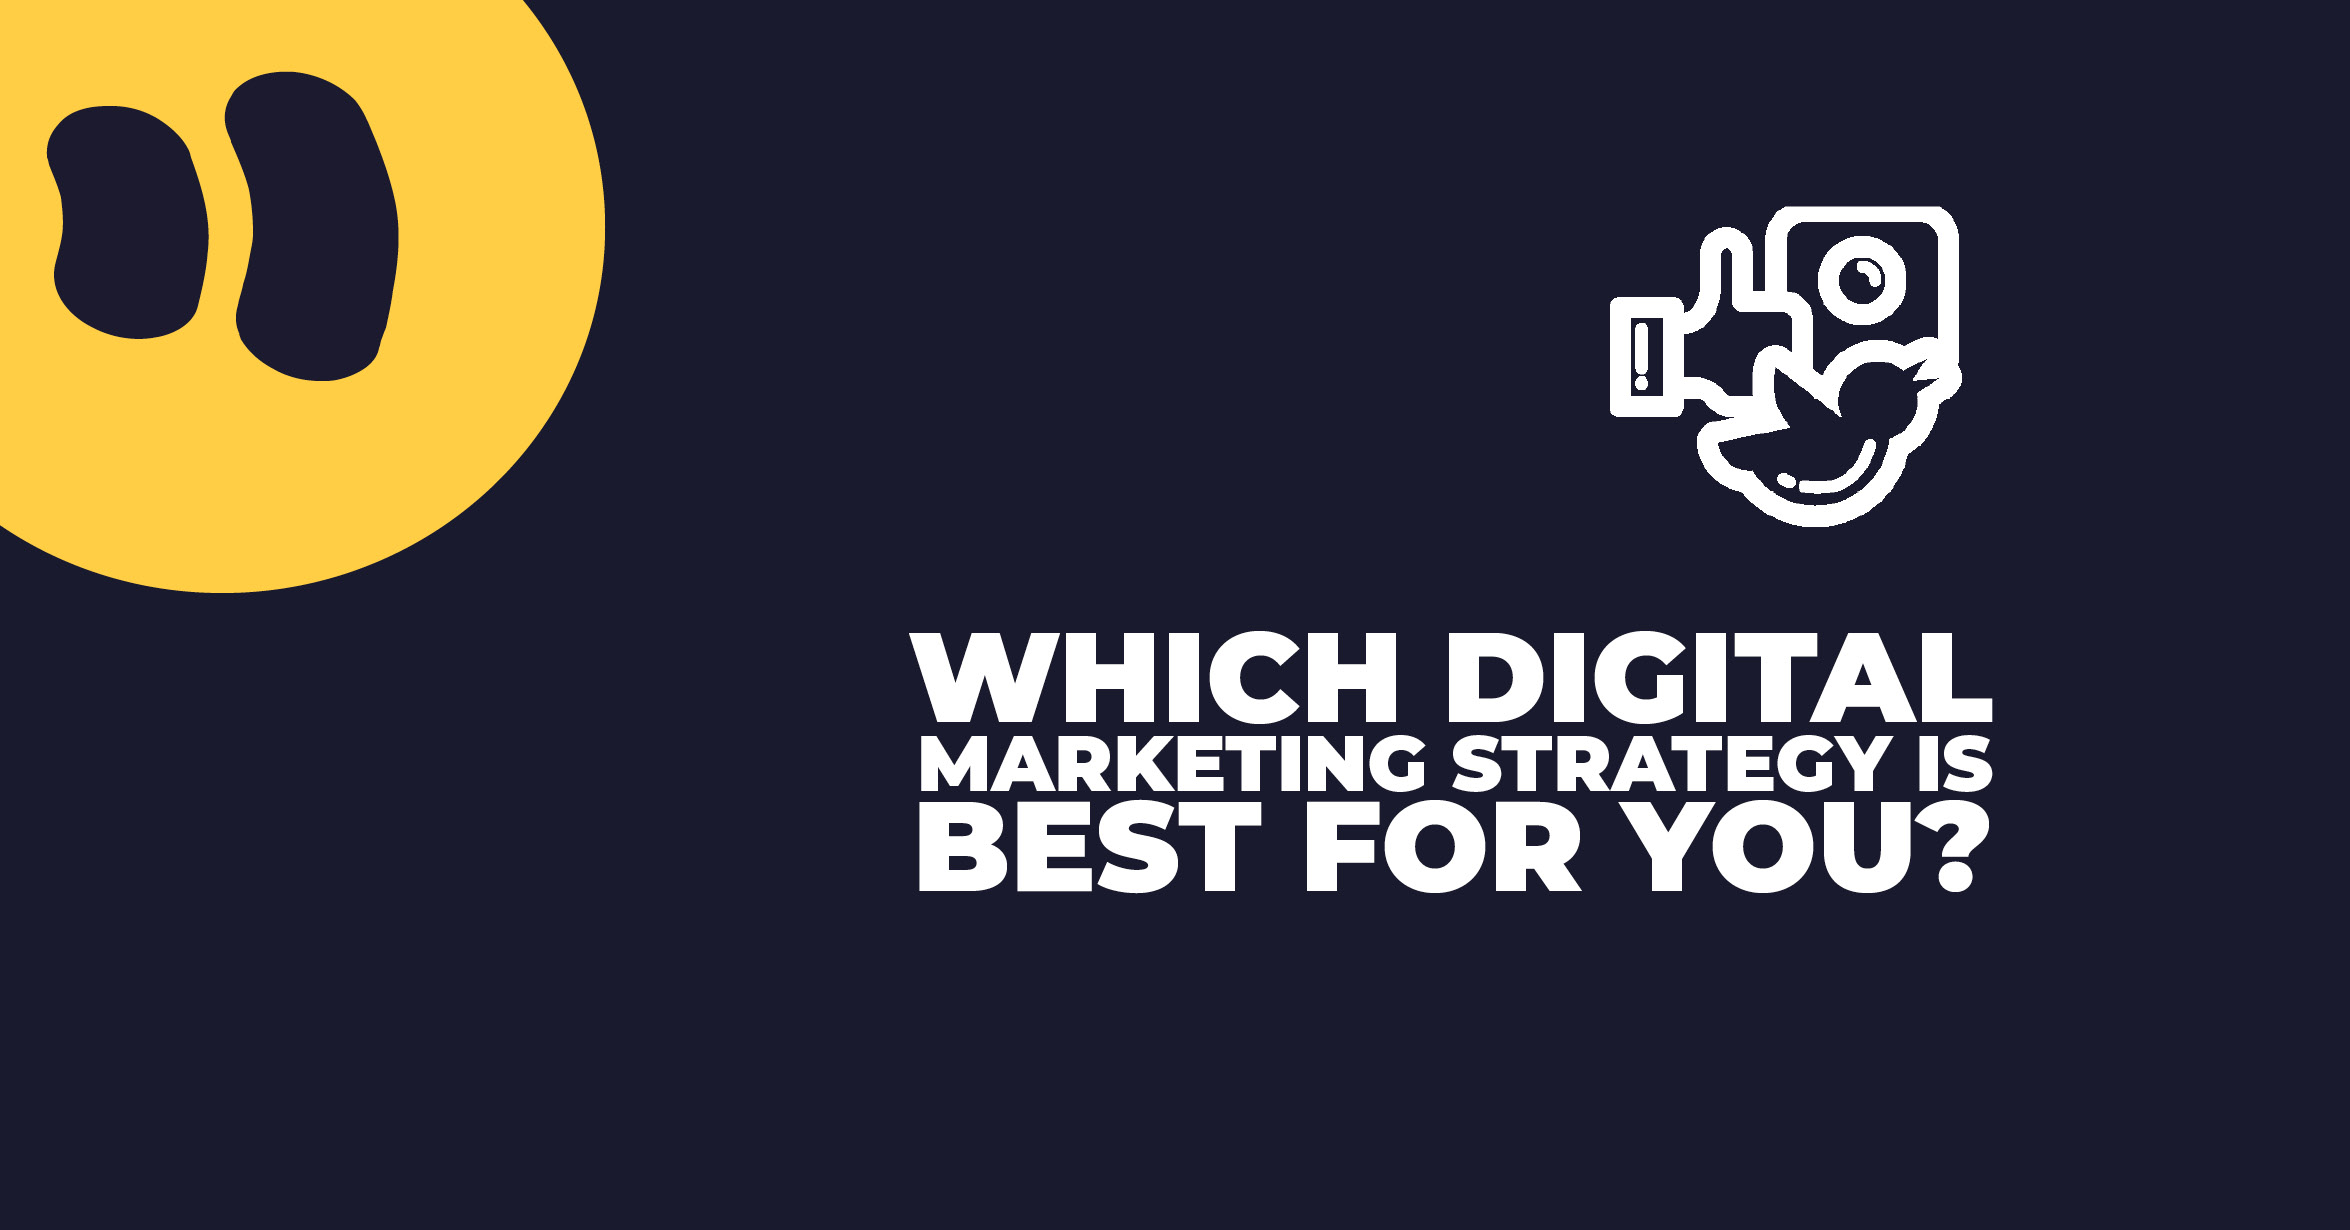 Which Digital Marketing Strategy Is Best for You?